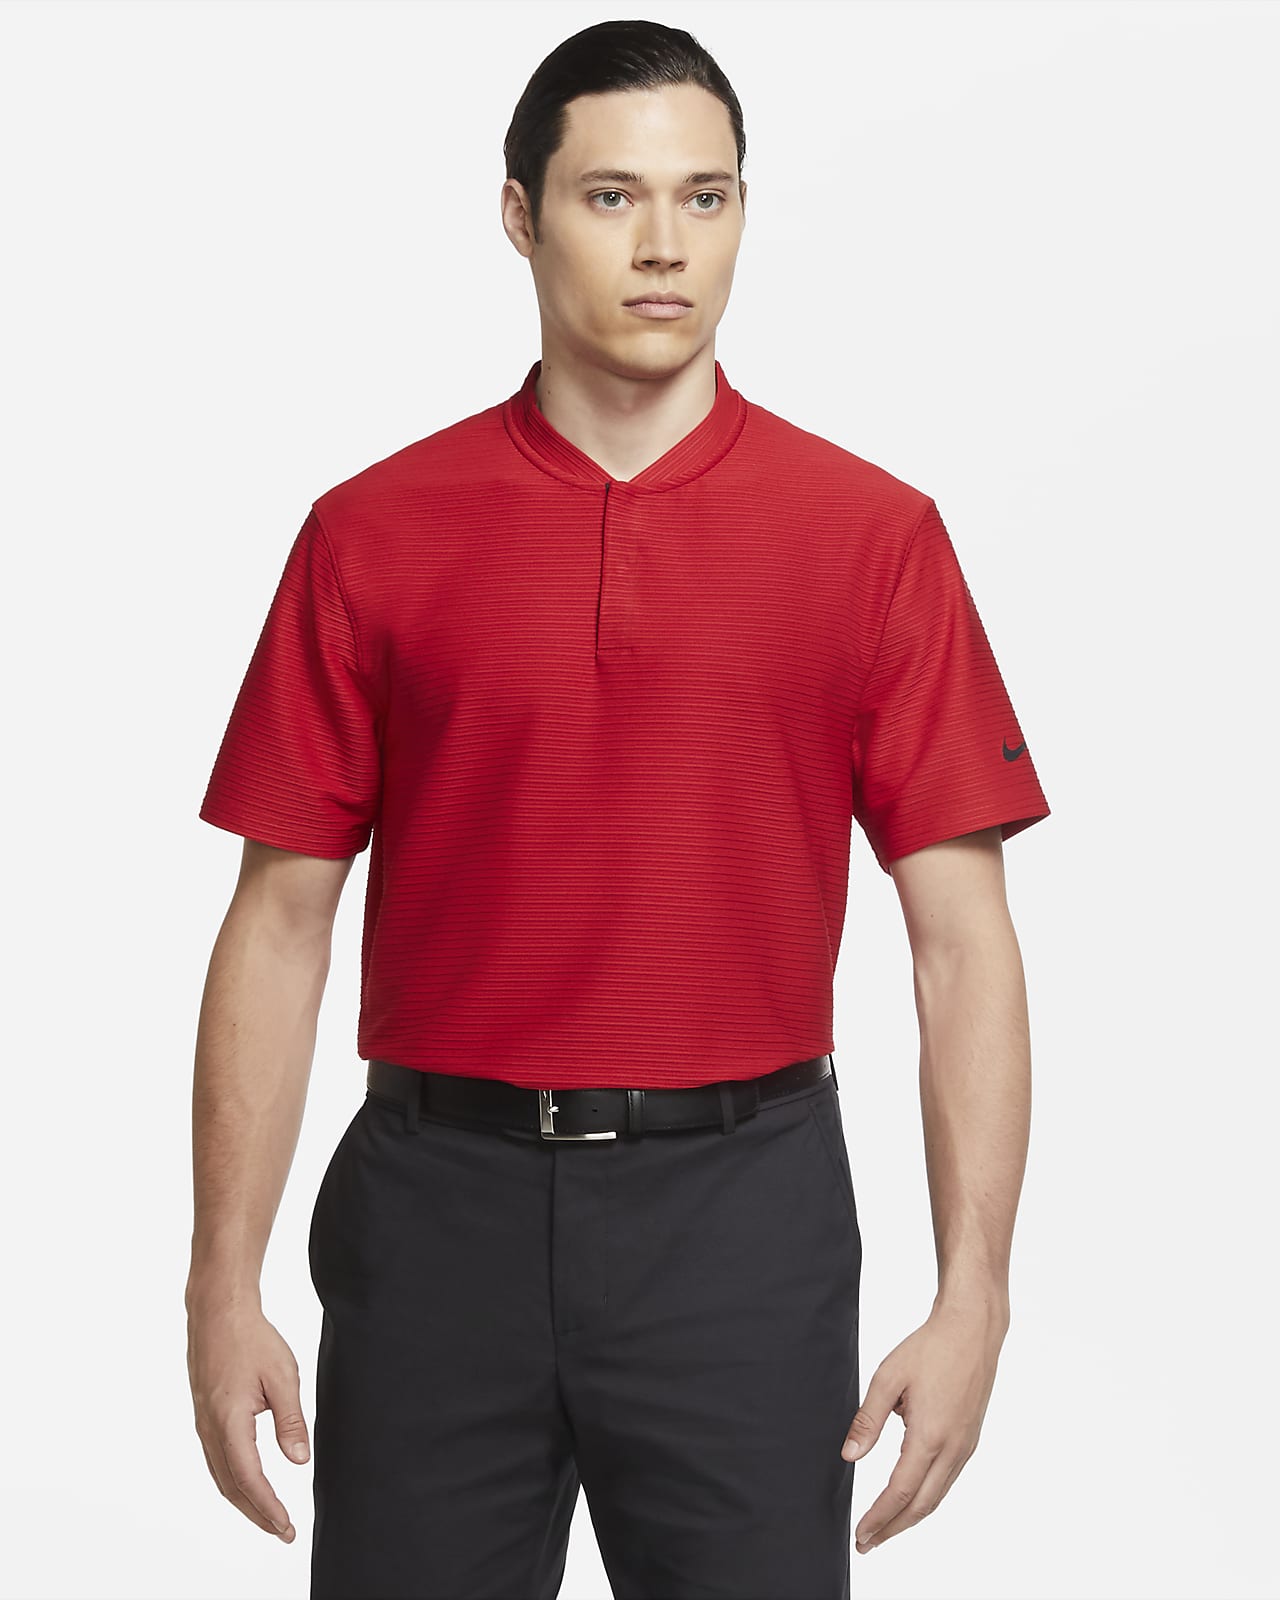 tiger woods red polo